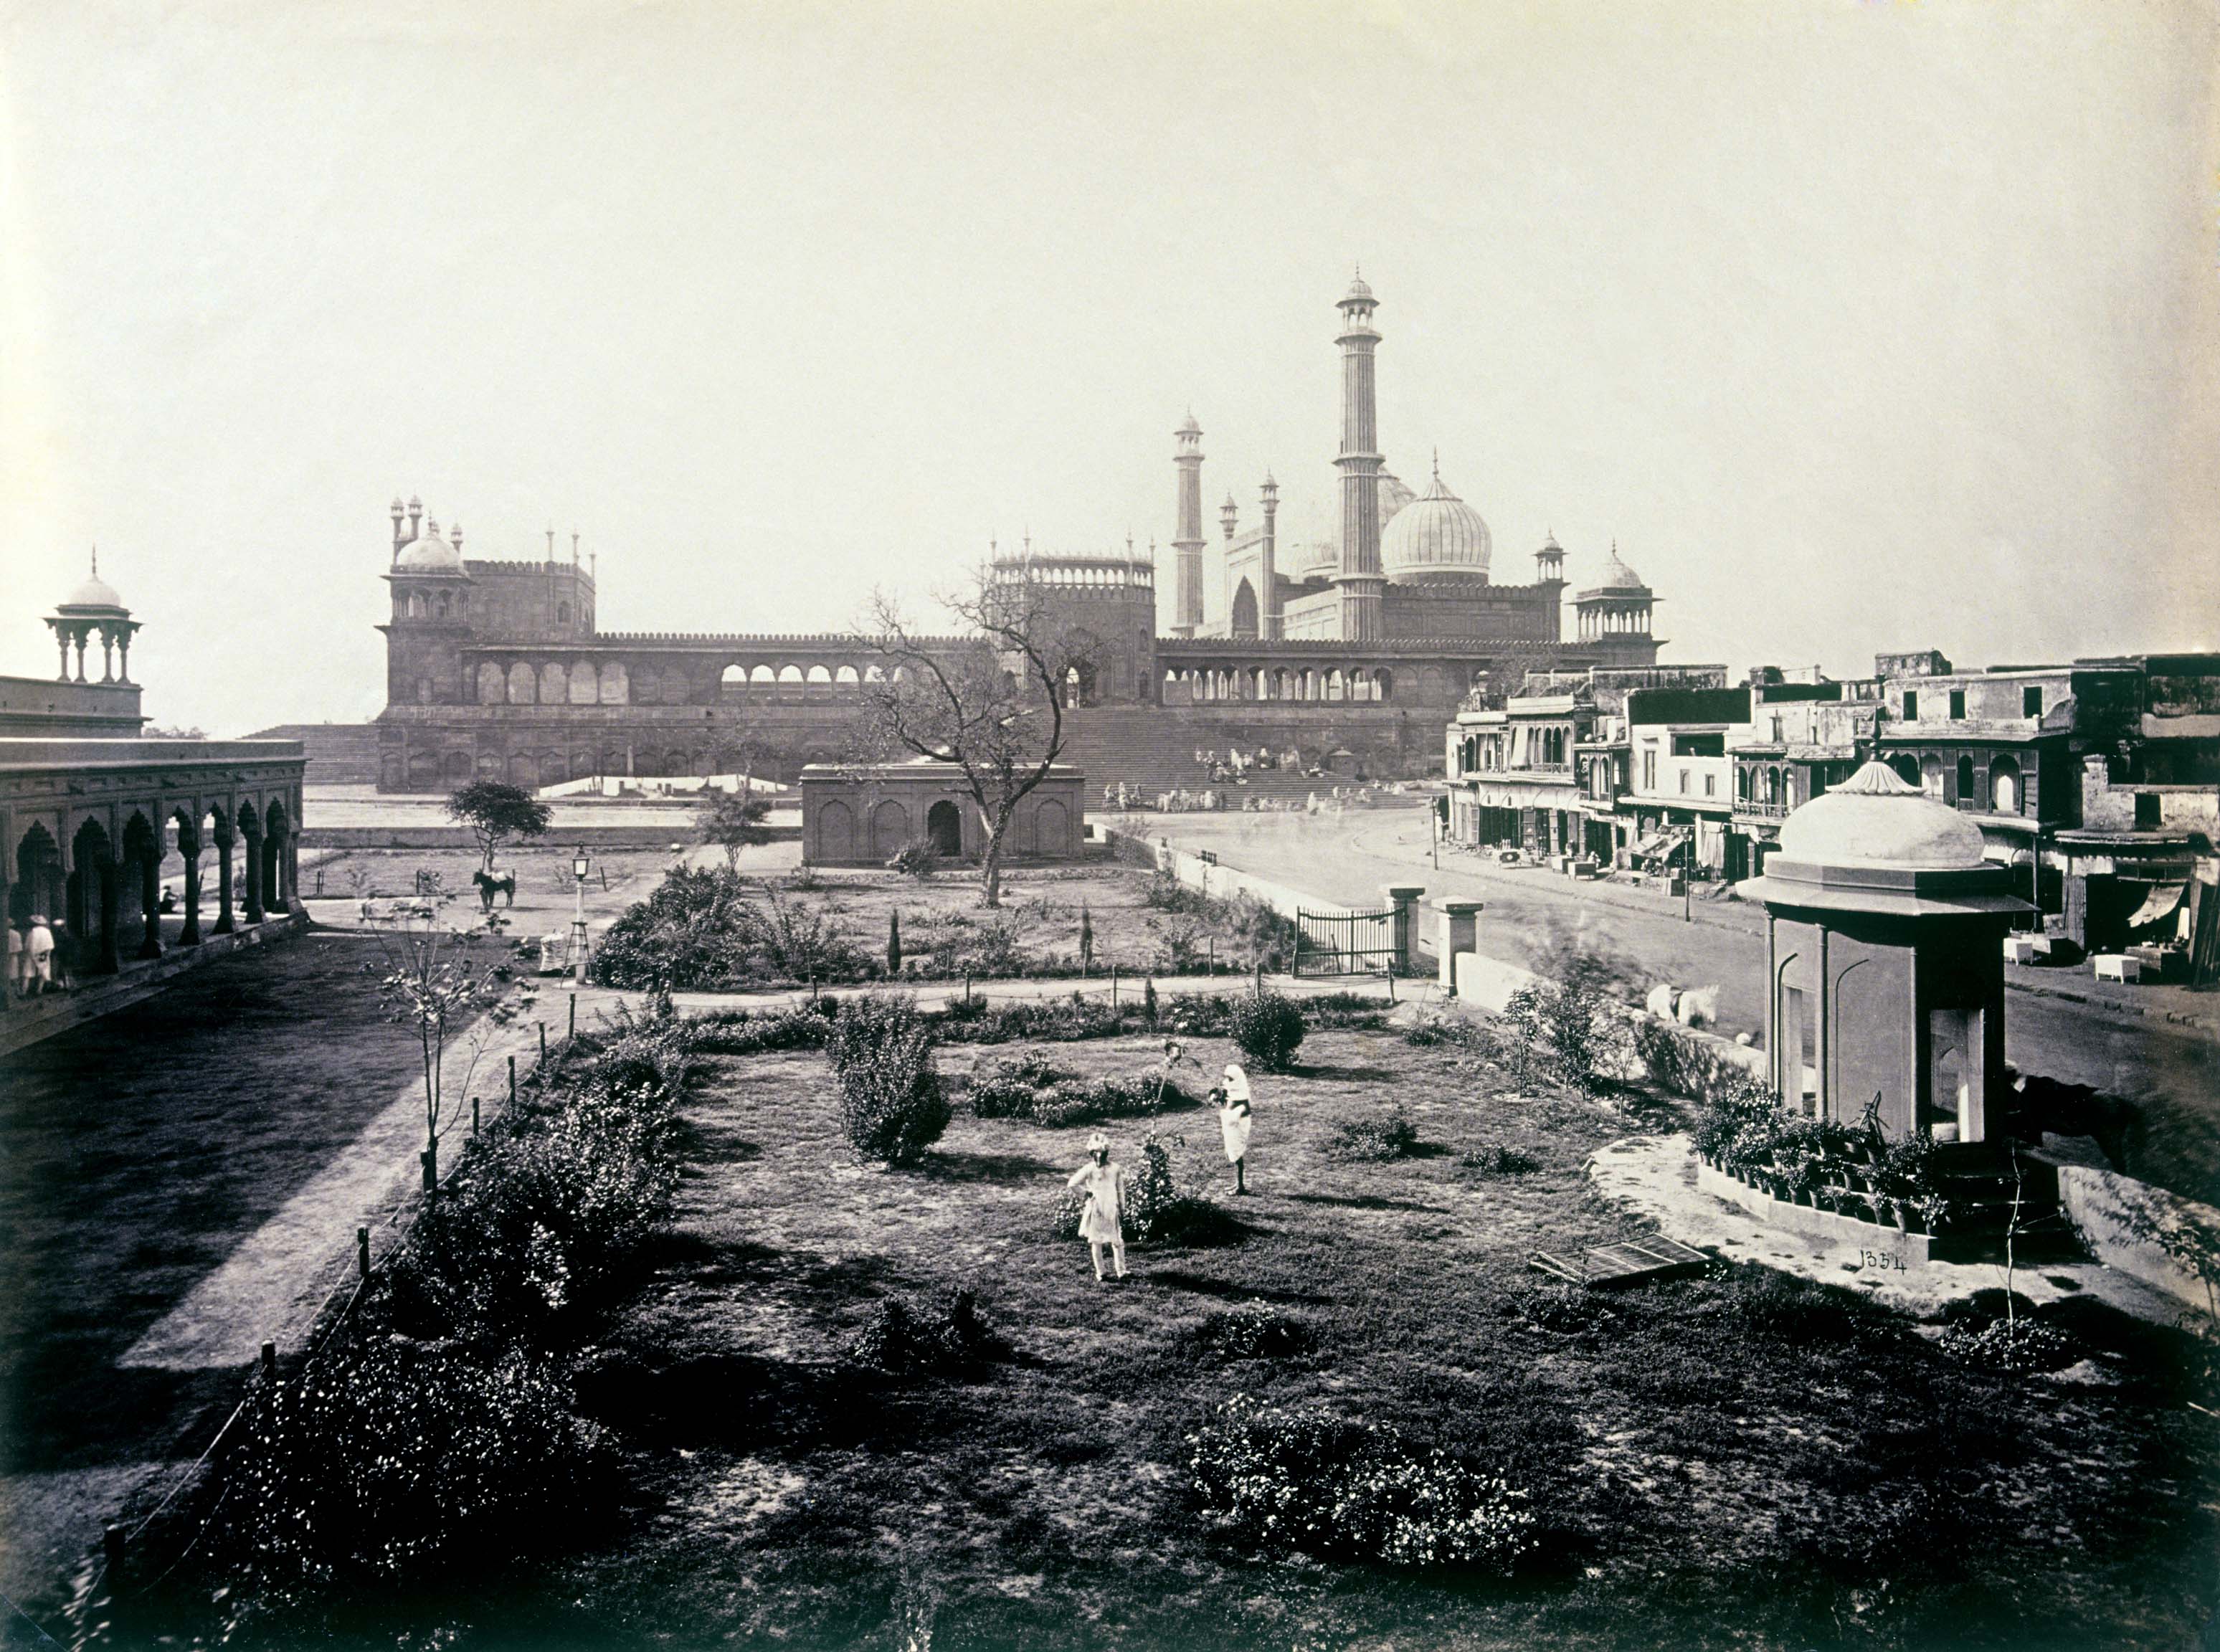 If one gives them a chance, some of the Historic Delhi images can make a familiar city appear utterly fresh